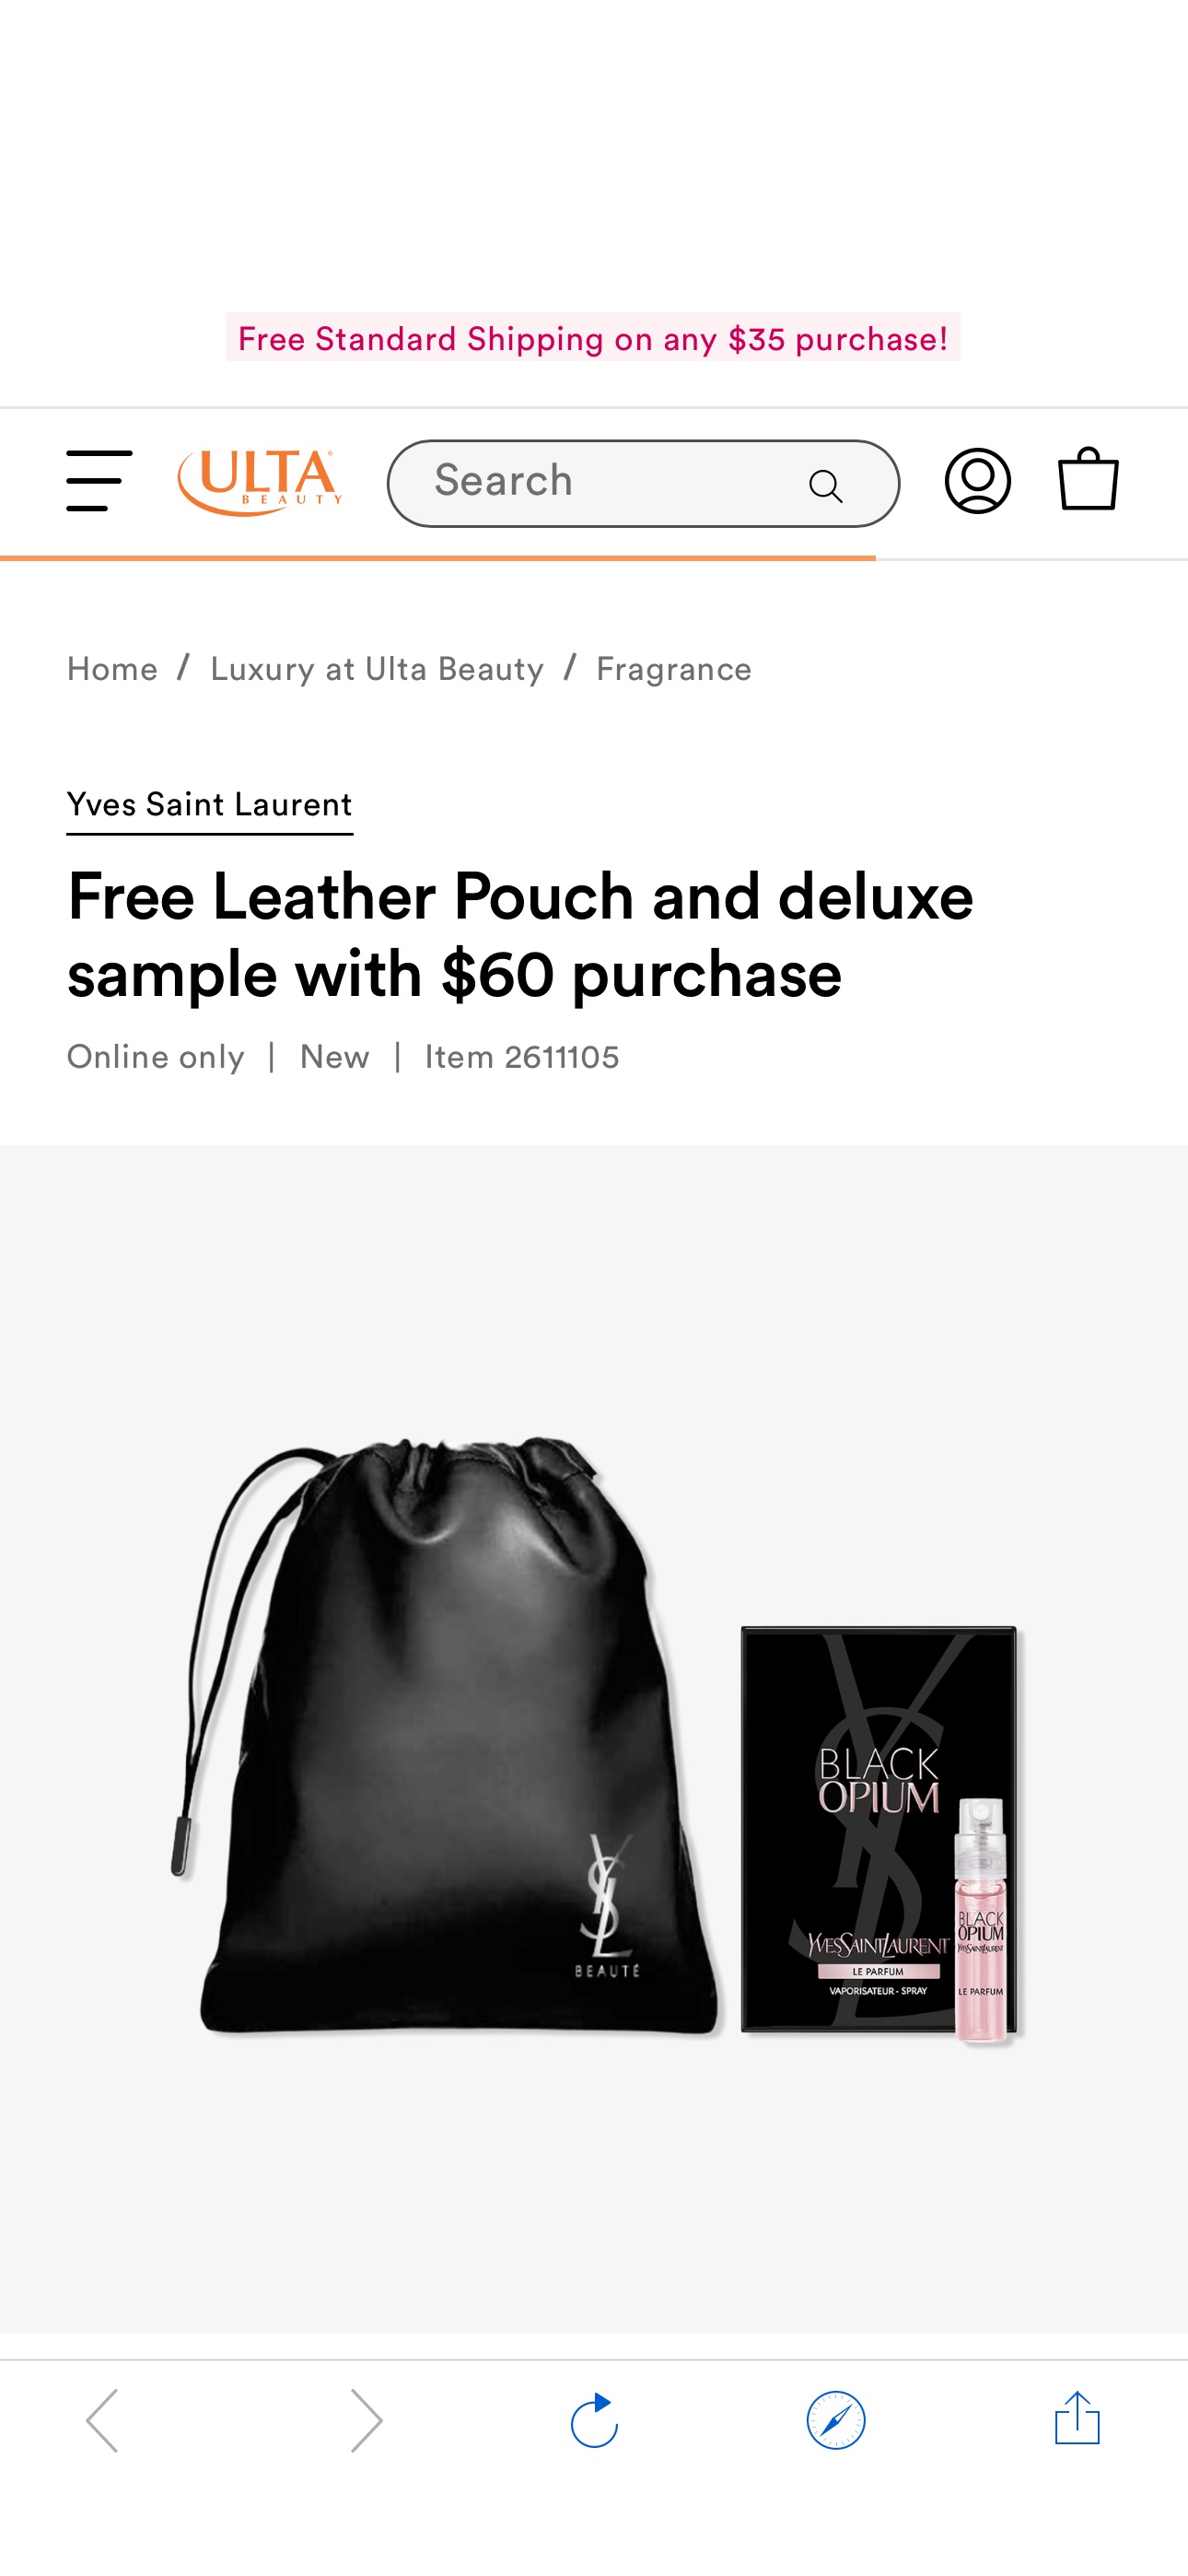 Free Leather Pouch and deluxe sample with $60 purchase - Yves Saint Laurent | Ulta Beauty